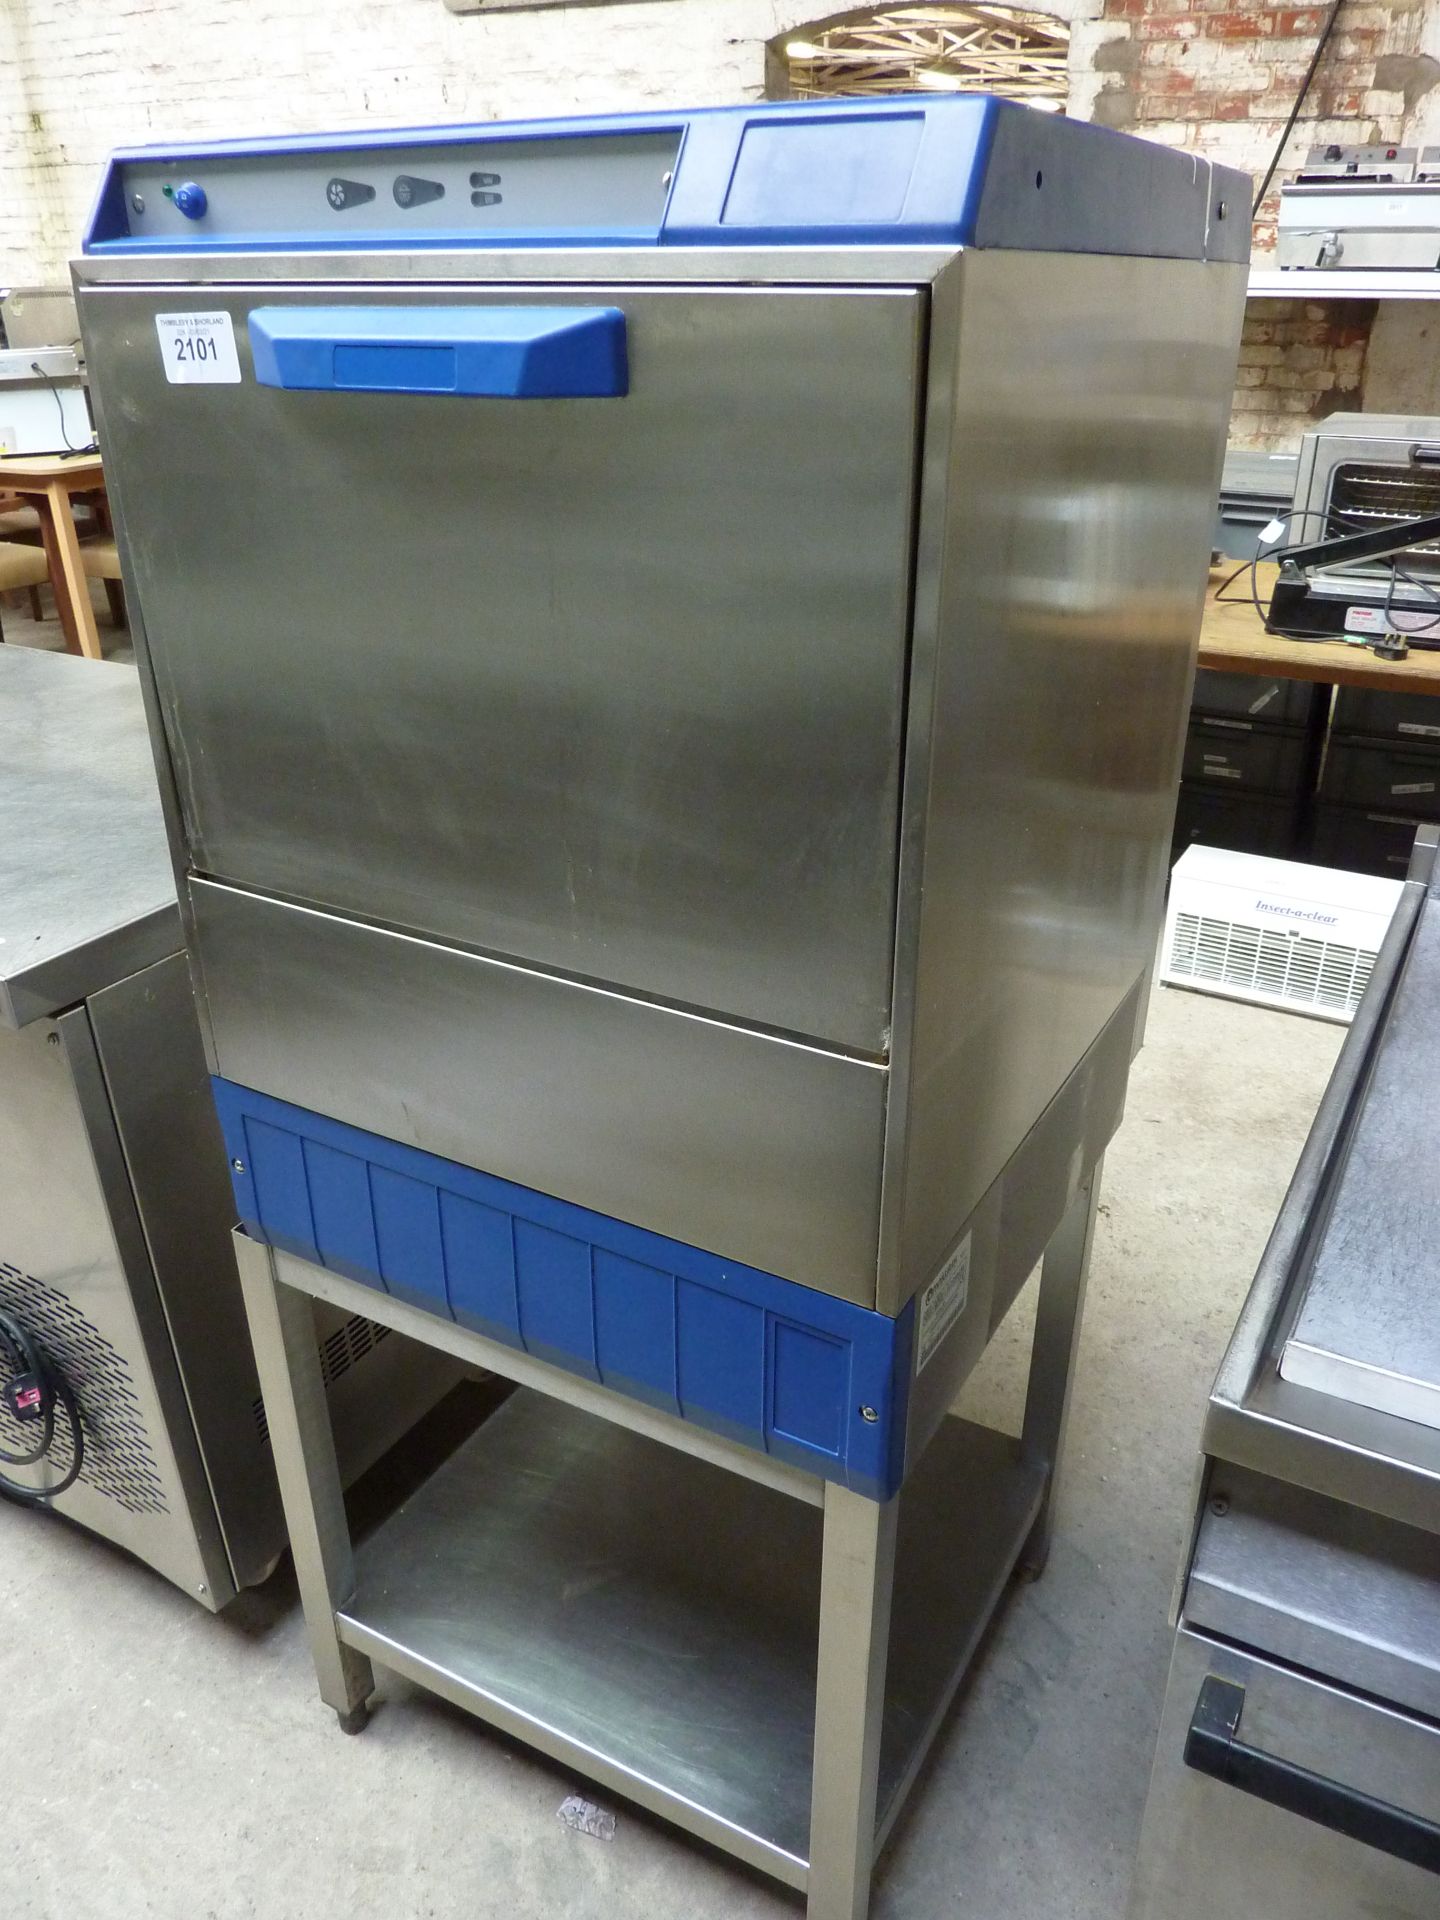 Mini wash commercial stainless steel dishwasher on stand, single phase